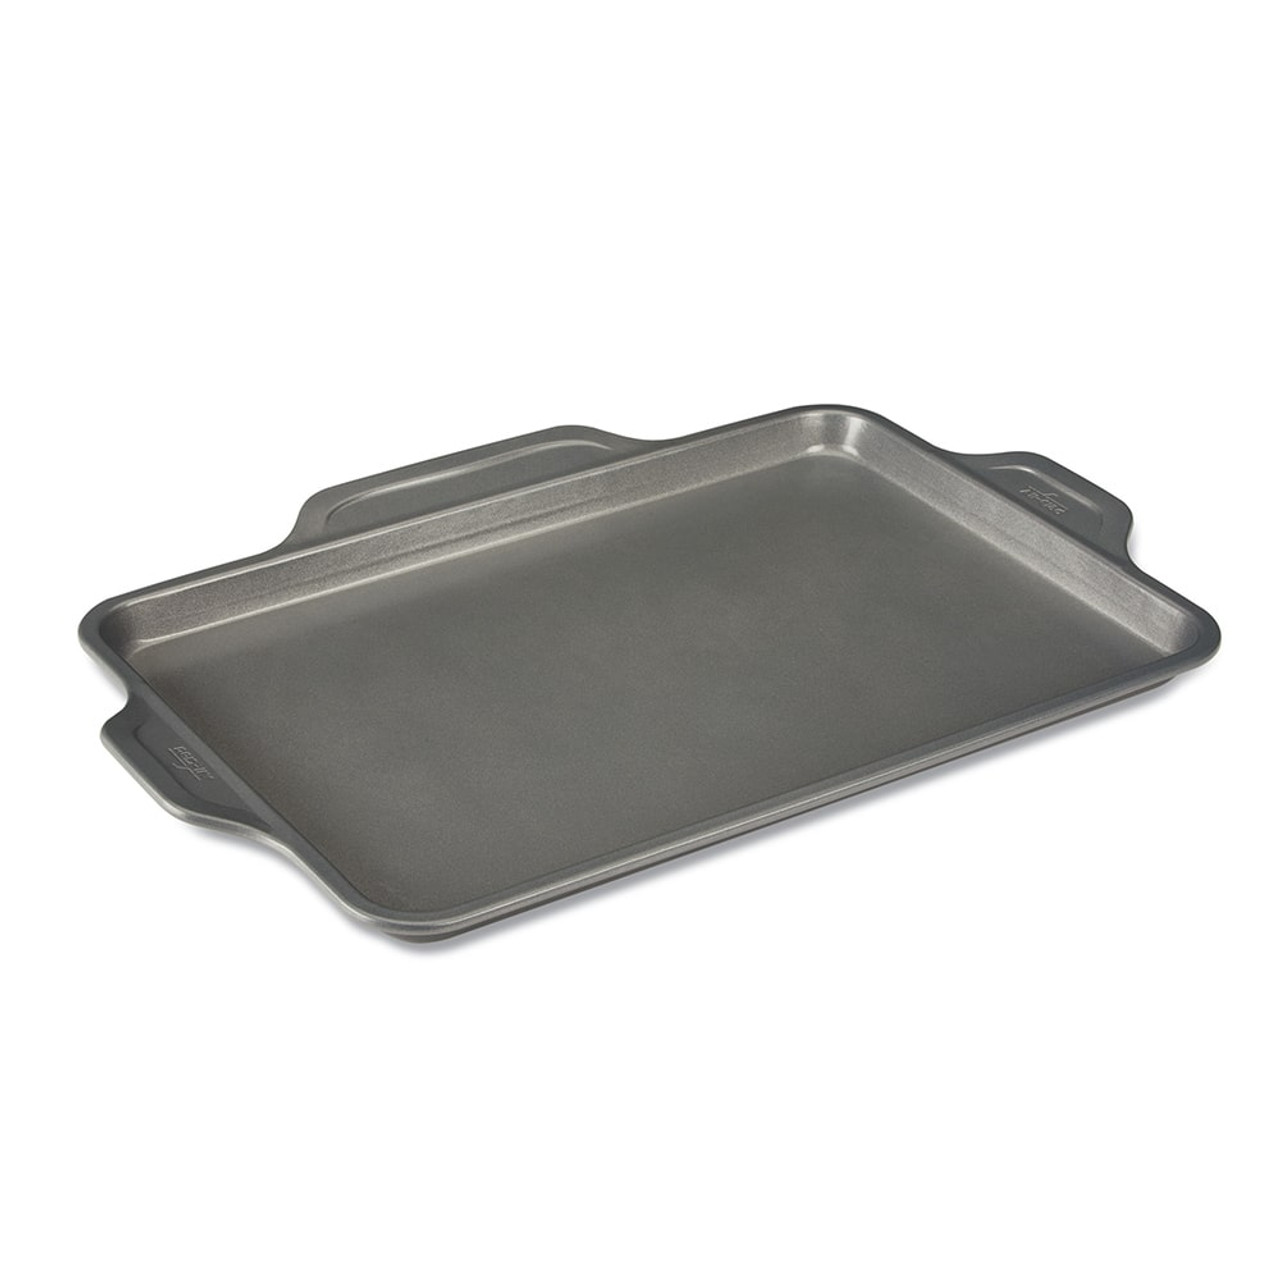 https://cdn11.bigcommerce.com/s-hccytny0od/images/stencil/1280x1280/products/3278/11724/all-clad-pro-release-half-sheet-pan__99270.1589498500.jpg?c=2?imbypass=on